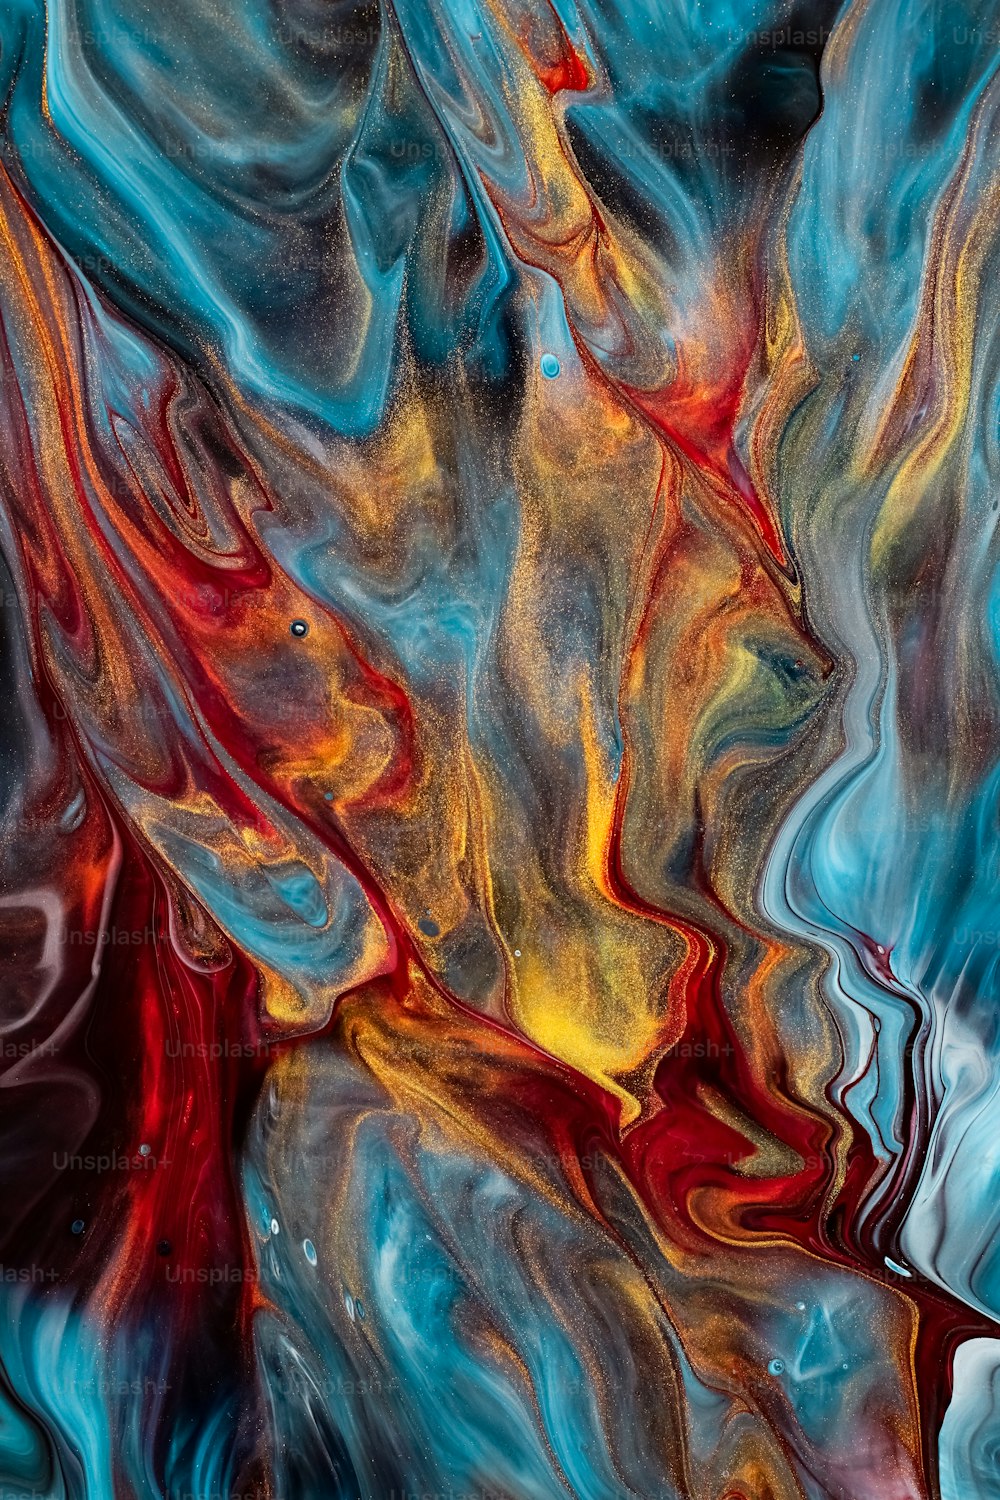 an abstract painting of blue, red, and yellow colors